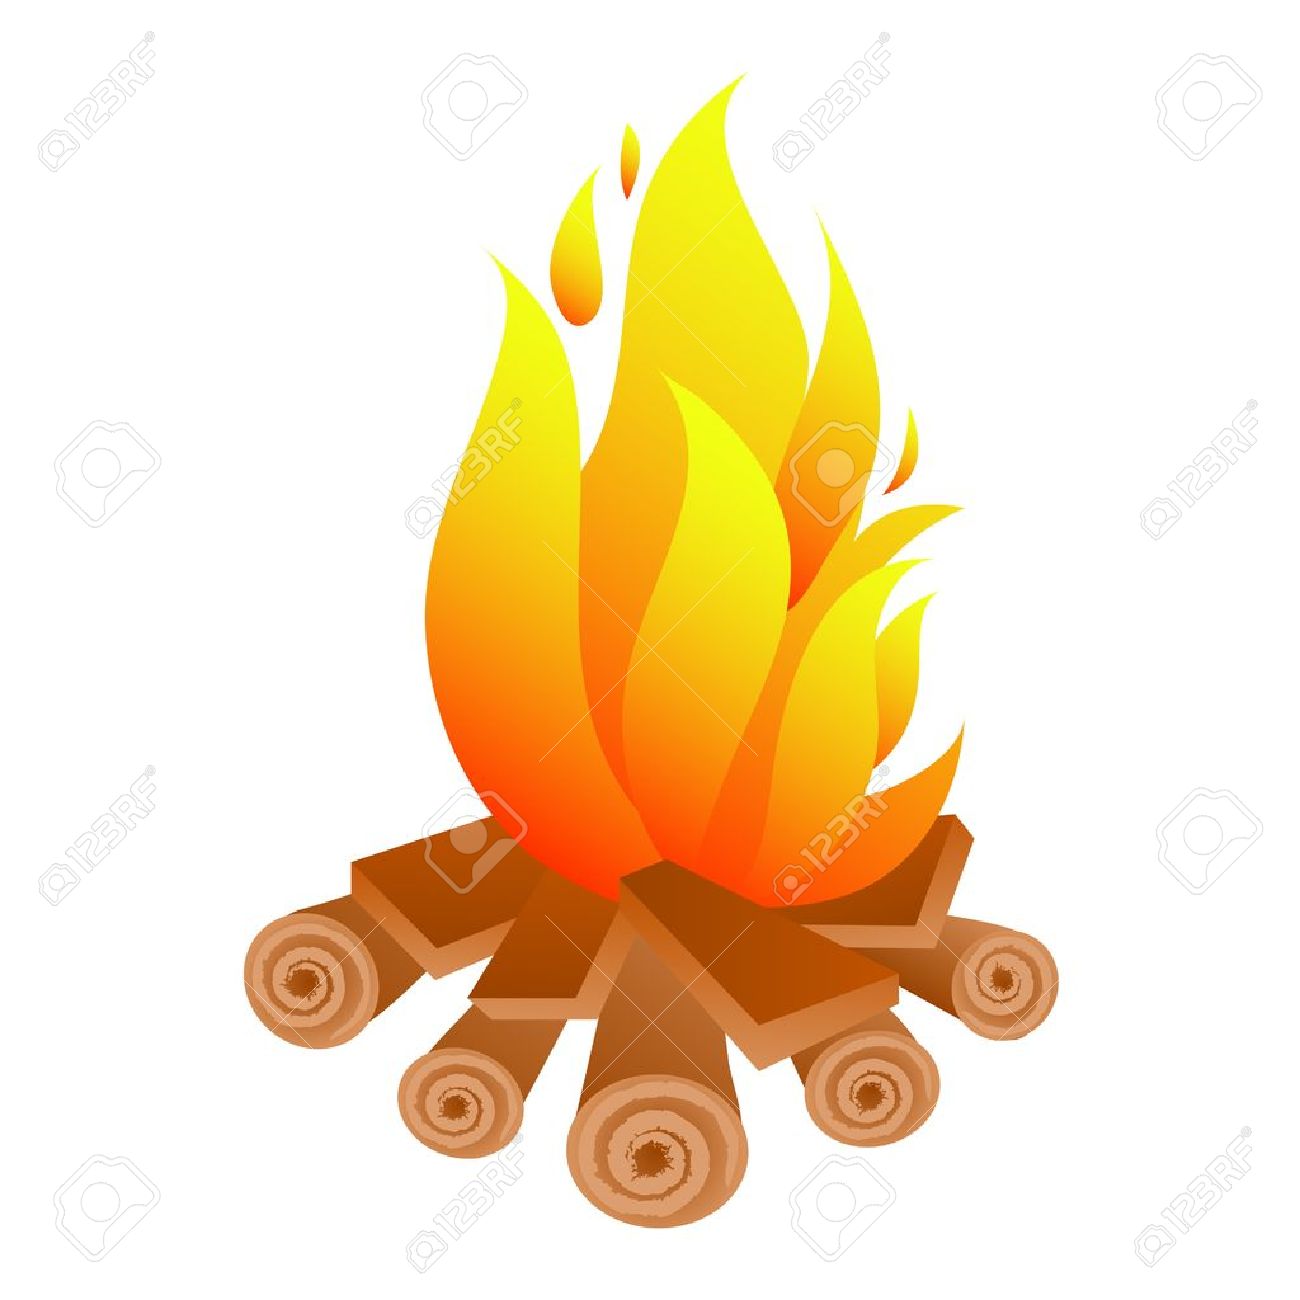 6,416 Forest Fire Stock Vector Illustration And Royalty Free.